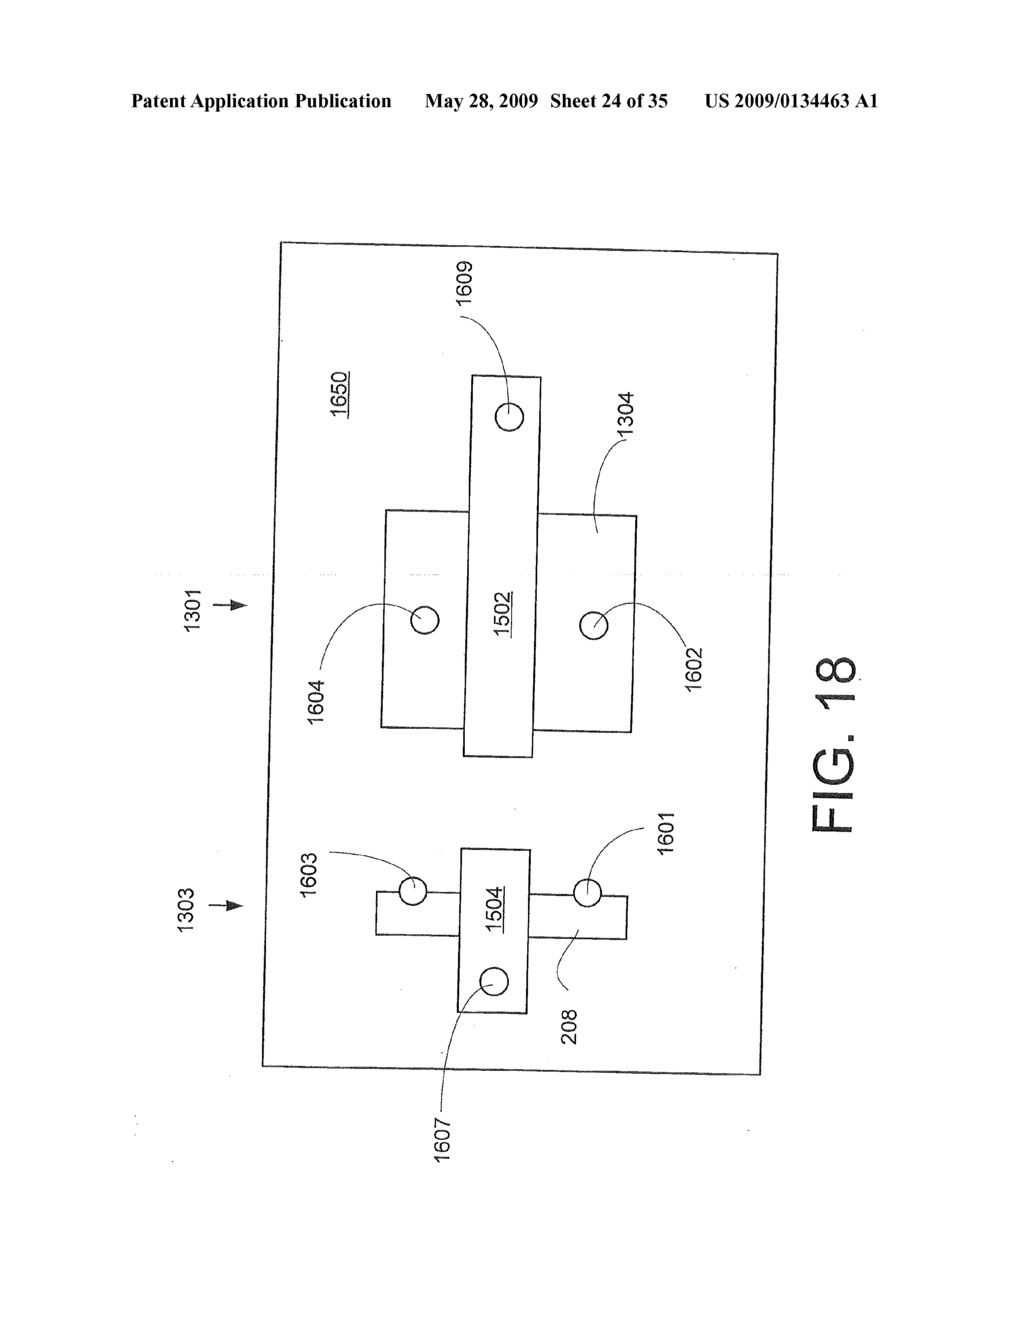 SEMICONDUCTOR STRUCTURE AND SYSTEM FOR FABRICATING AN INTEGRATED CIRCUIT CHIP - diagram, schematic, and image 25